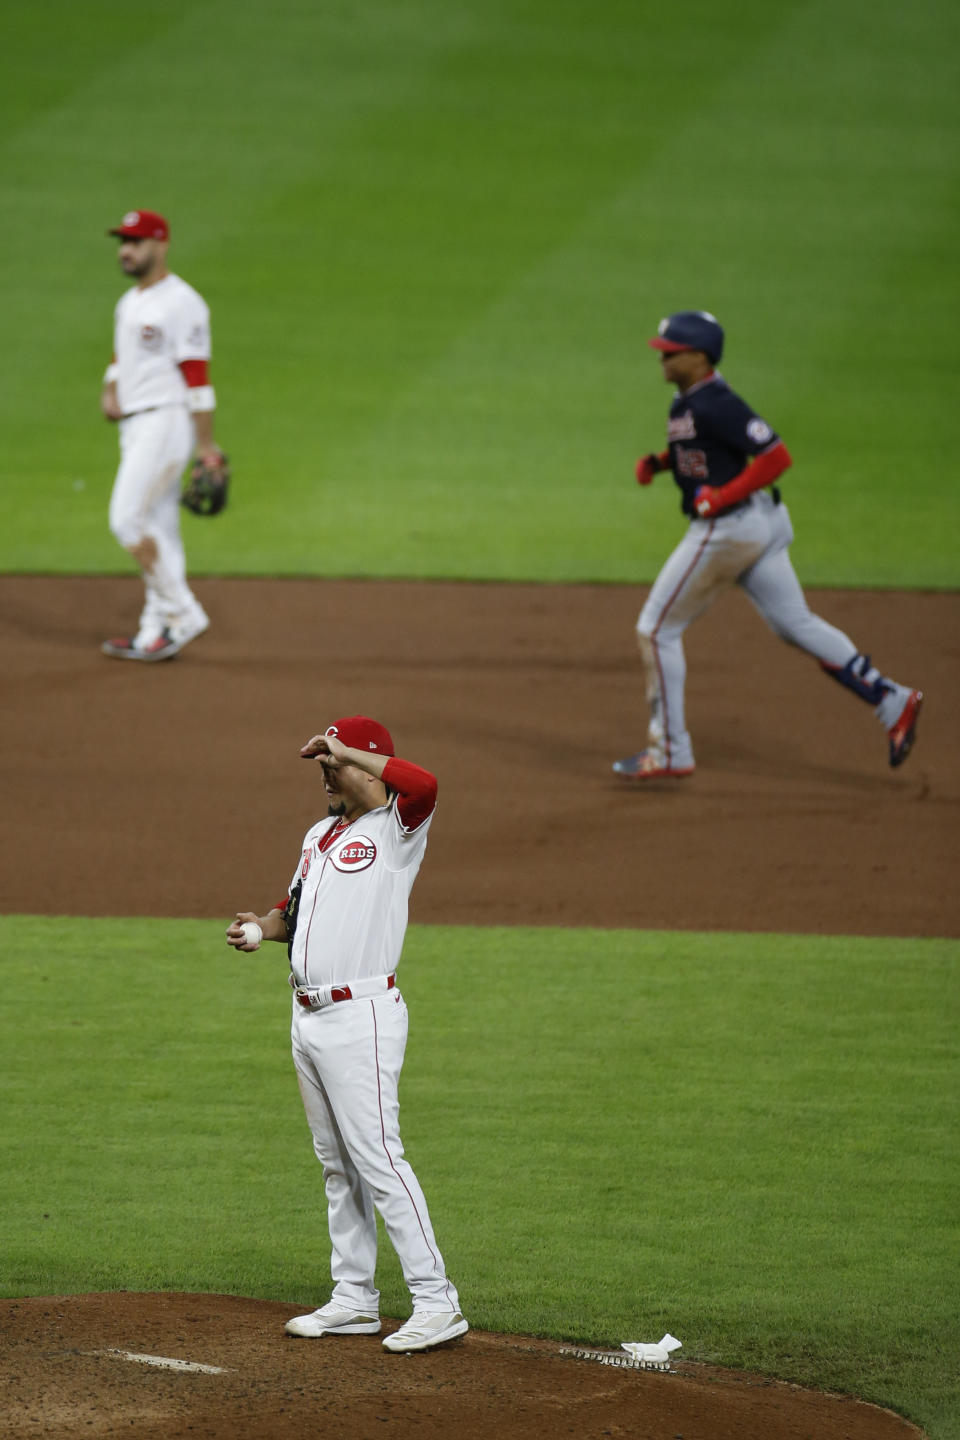 Washington Nationals' Juan Soto, top right, rounds the bases after hitting a home run against Cincinnati Reds' Luis Castillo, foreground, during the sixth inning of a baseball game Thursday, Sept. 23, 2021, in Cincinnati. (AP Photo/Jay LaPrete)